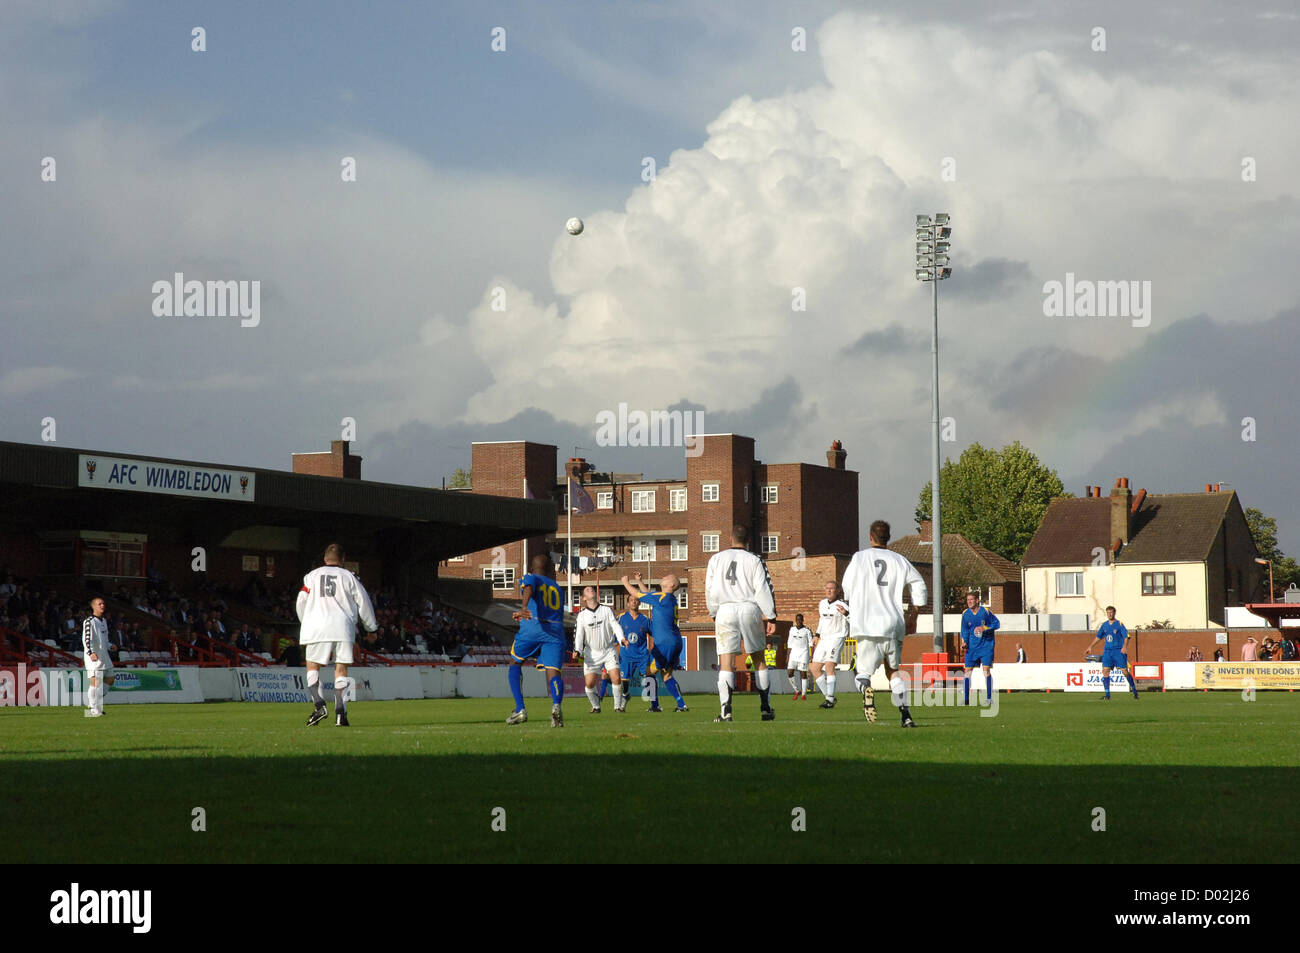 Kingston upon Thames, England. AFC Wimbledon in action at their current Kingsmeadow stadium. Stock Photo